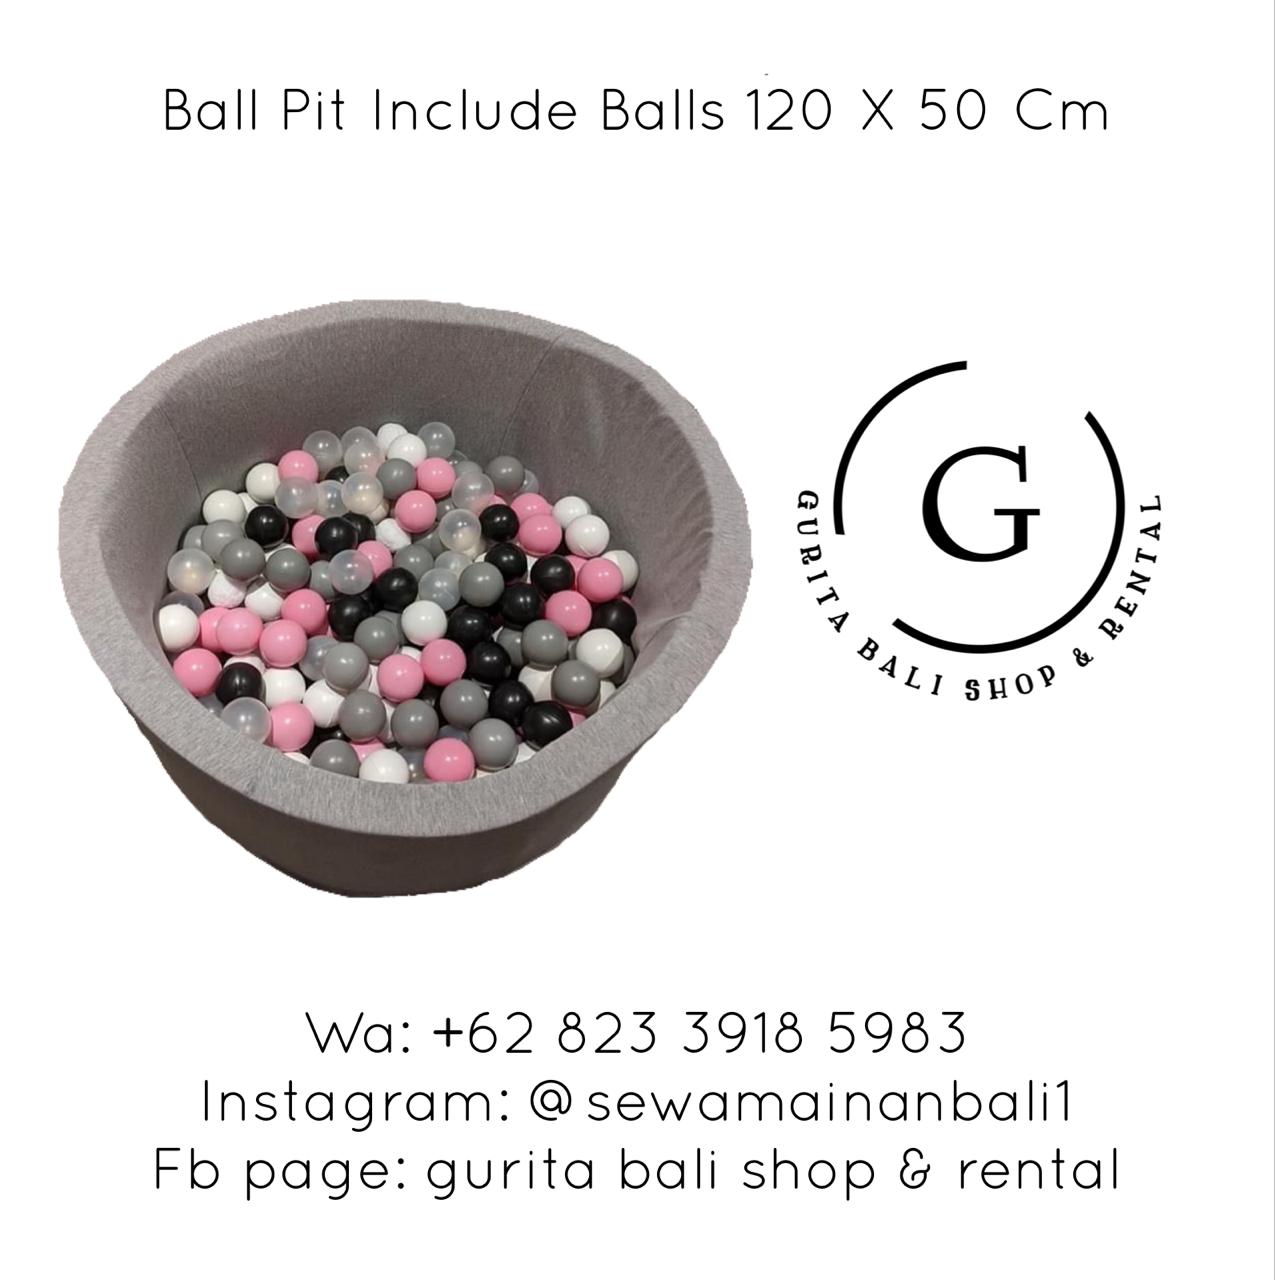 BALL PIT INCLUDE BALLS